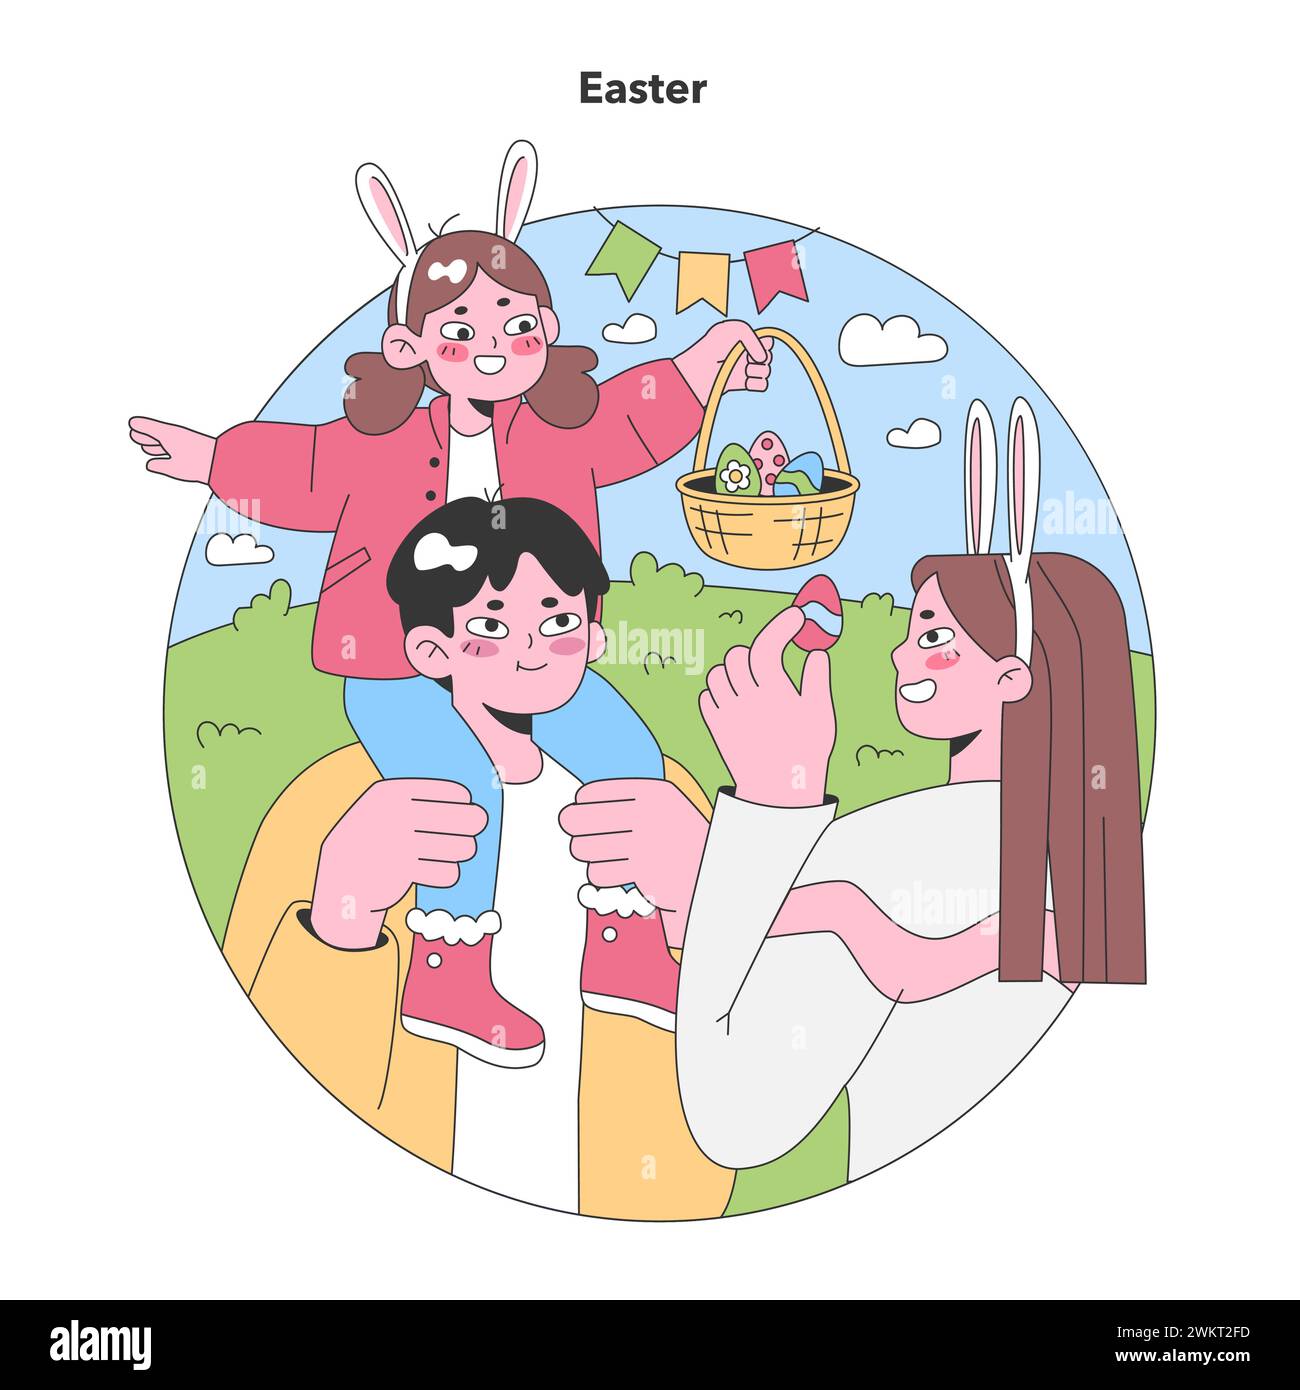 Easter Celebration. Family enjoys a sunny egg hunt, with children wearing bunny ears and sharing chocolate treats. Flat vector illustration Stock Vector